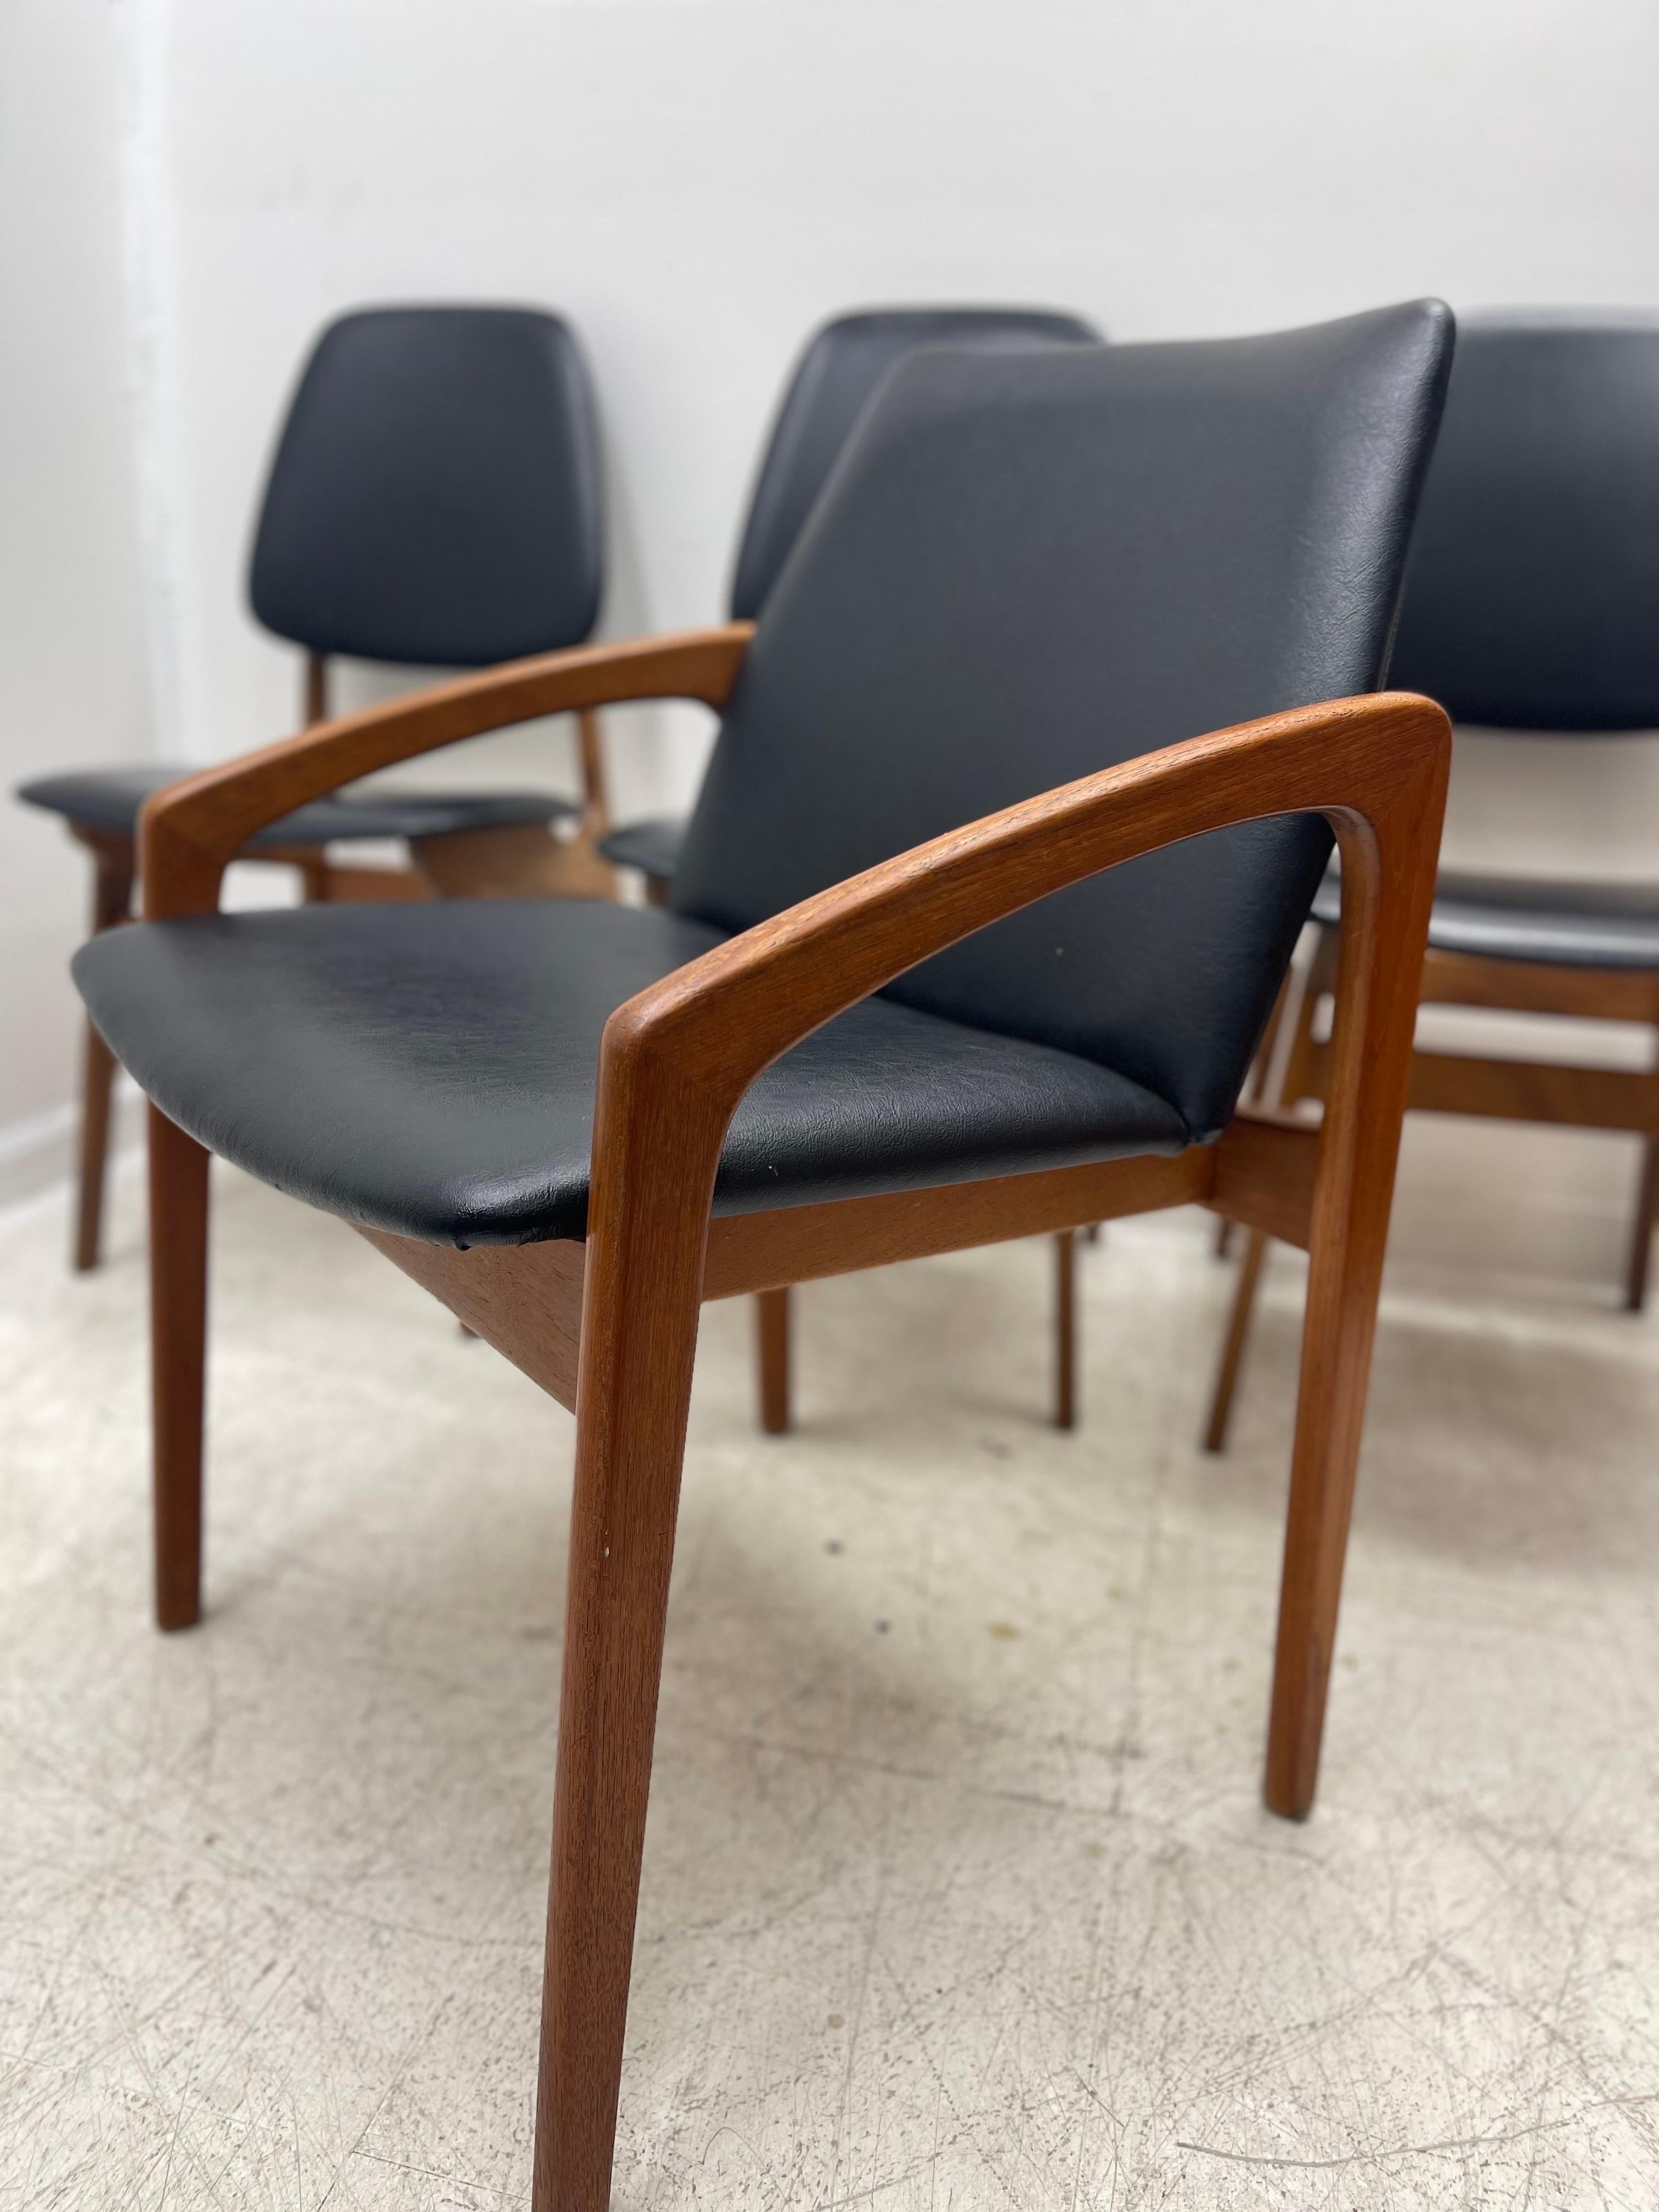 Vintage Danish Modern Chairs Set of 4 In Good Condition For Sale In Seattle, WA